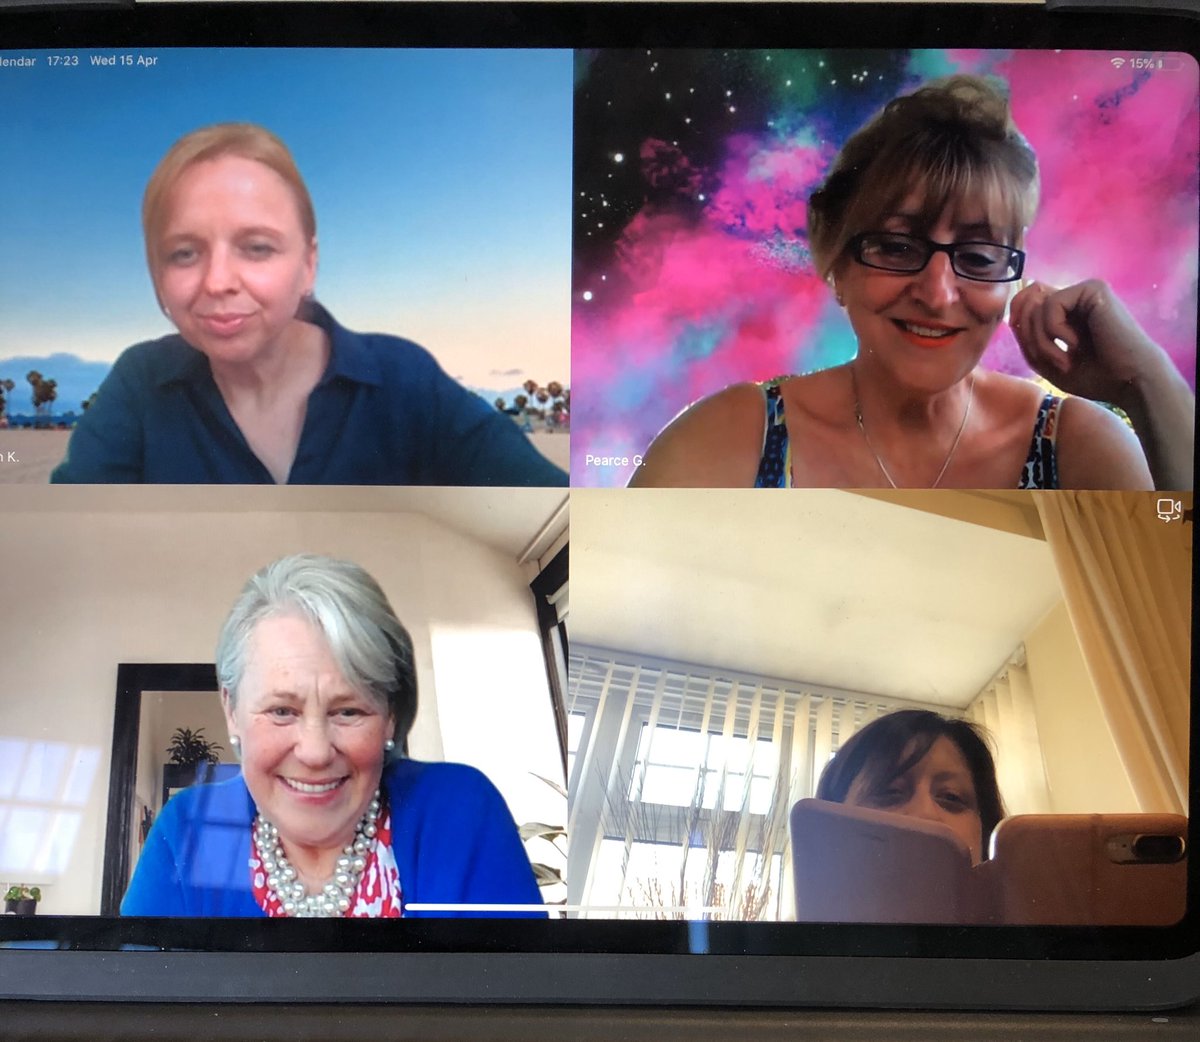 Daily virtual end of the day check-in with my HR/OD team @CombinedNHS #LookingAfterEachOther #WellbeingSupport #ProudofmyTeam @JaneRook1 @PeterAxonCEO @JOB_NHS @ileolusi @MattJPsych @Prerana_Issar @amandajoyoates @AnnInWork